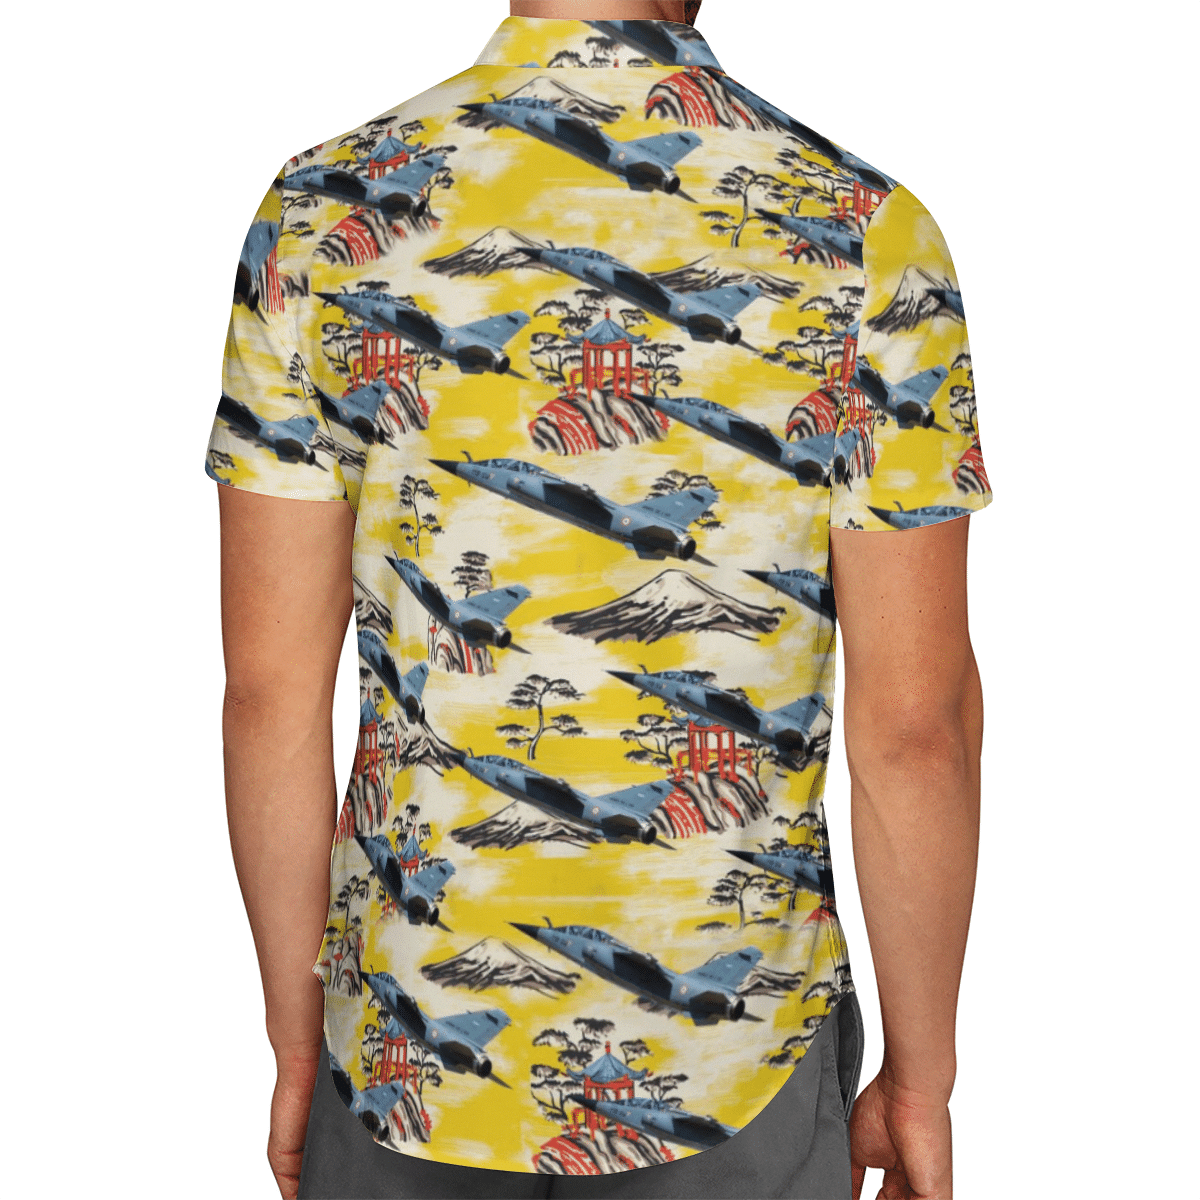 Going to the beach with a quality shirt 171